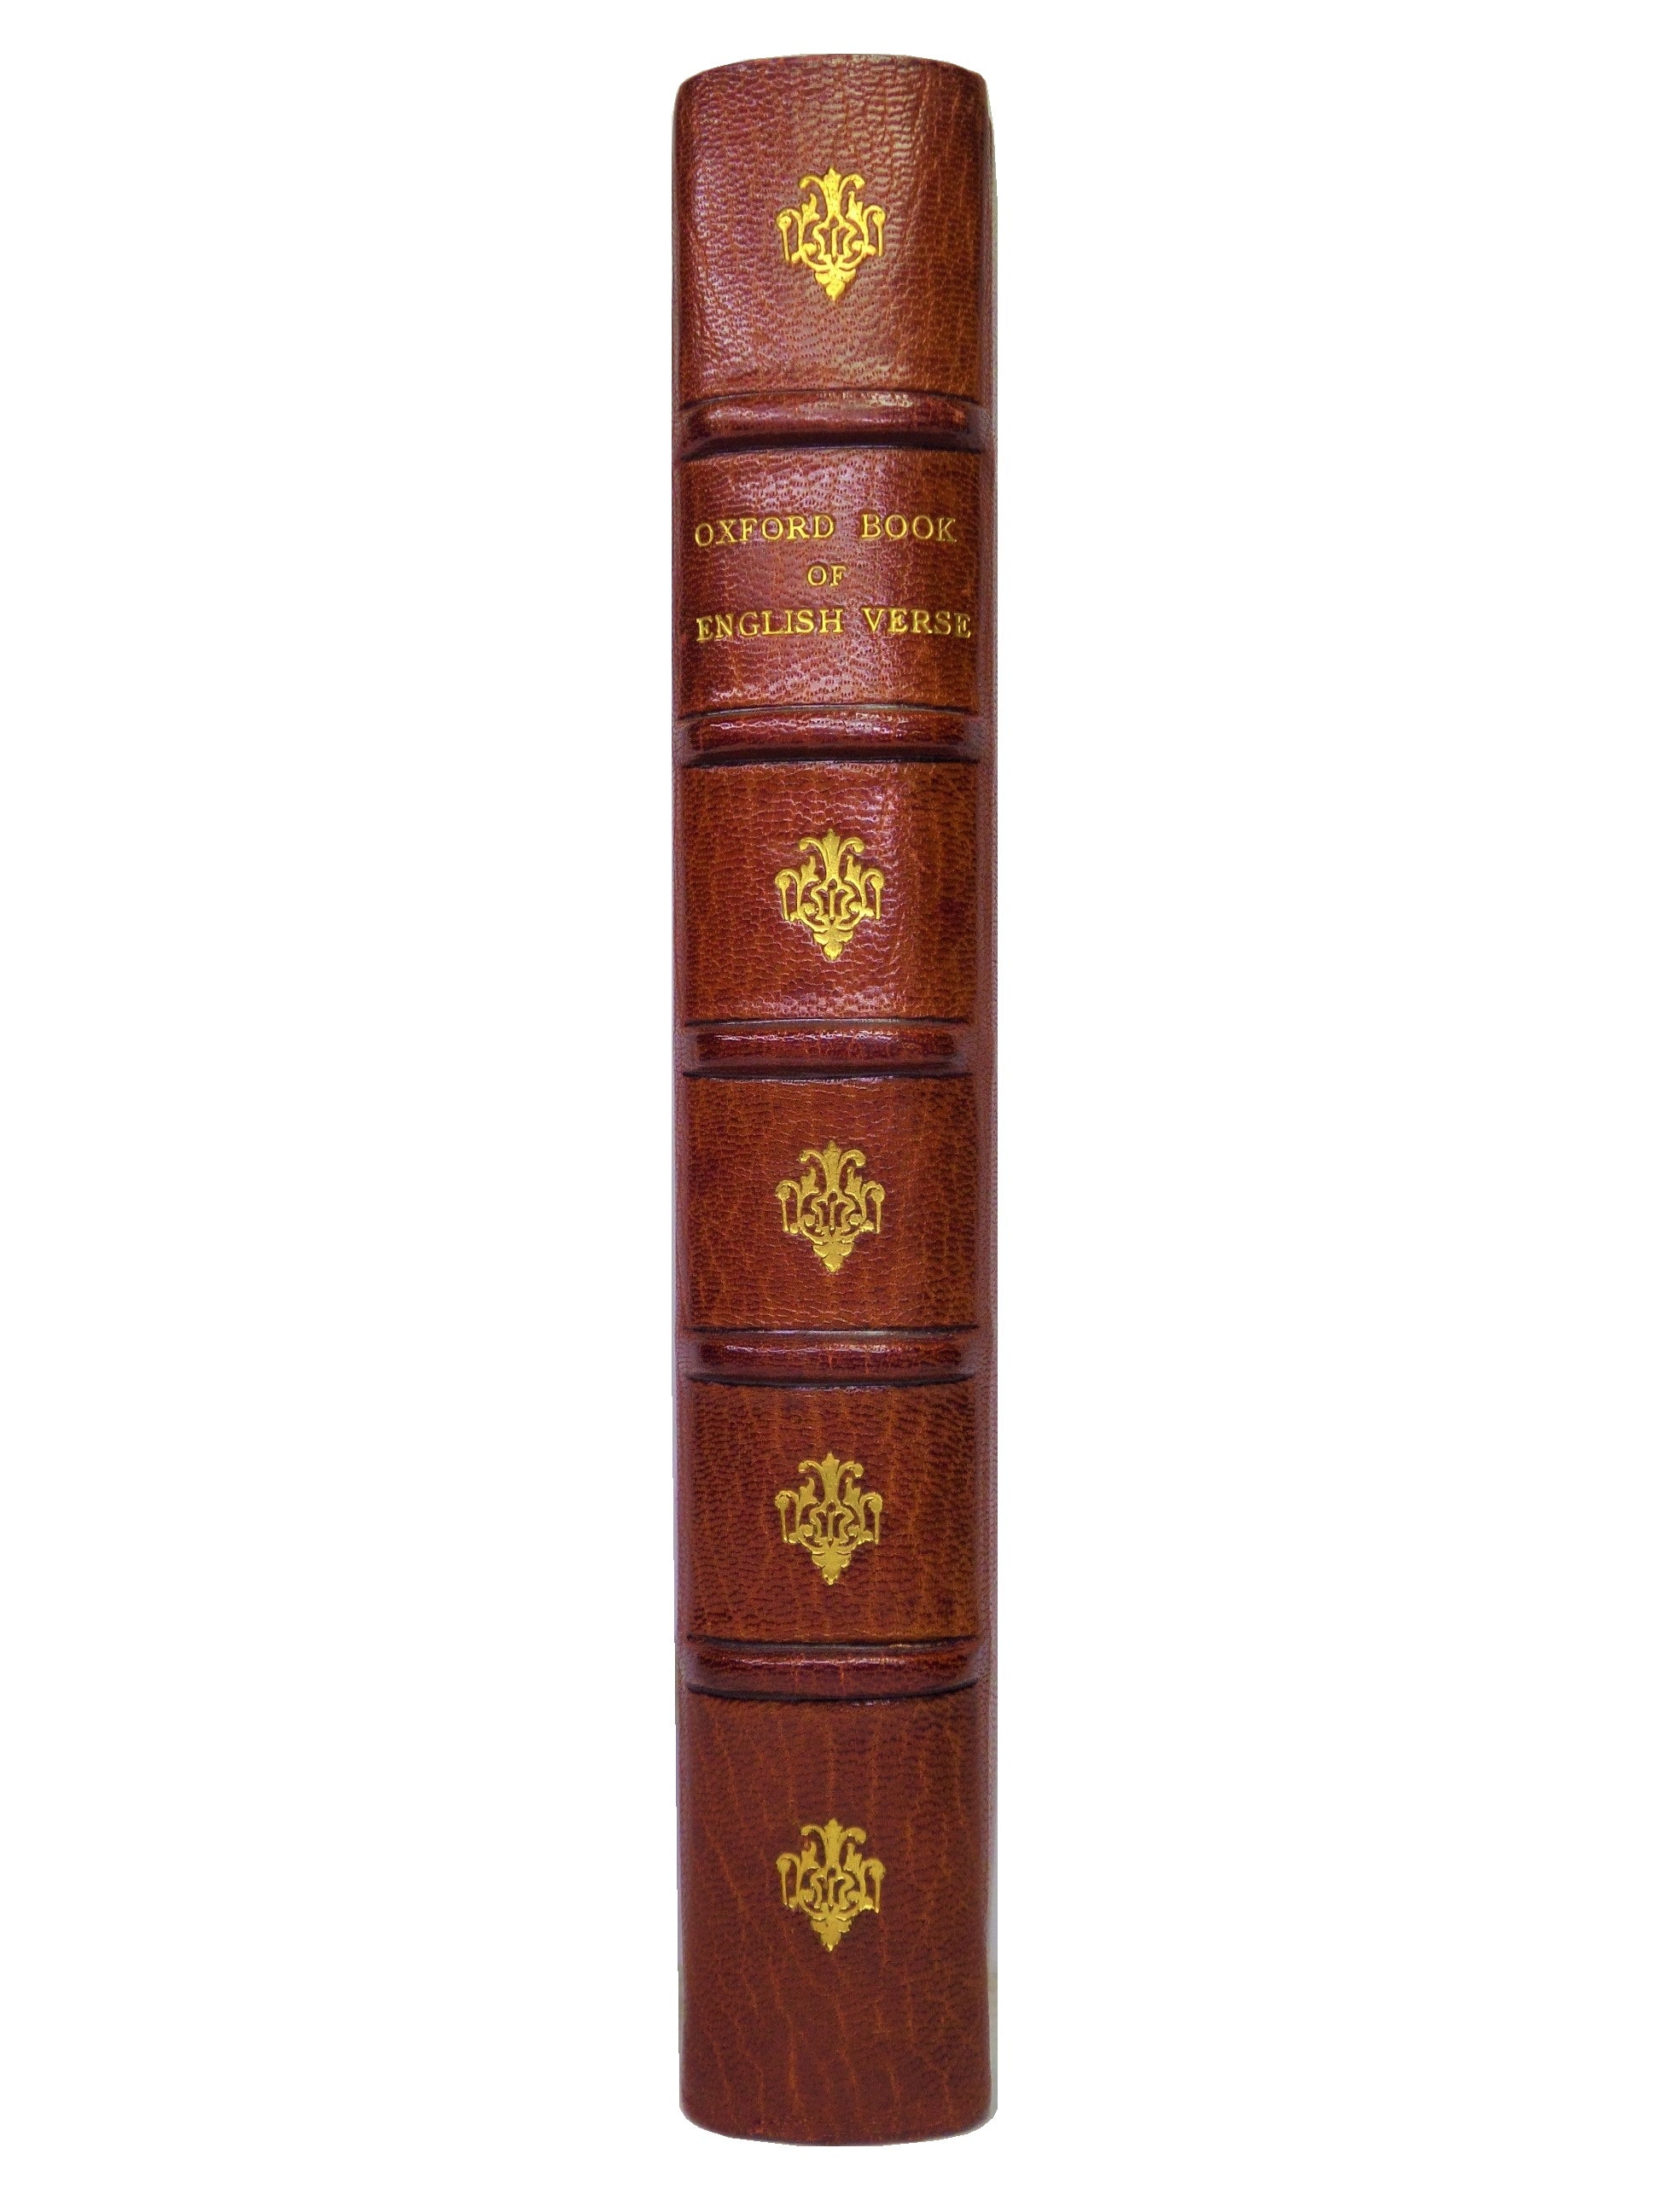 THE OXFORD BOOK OF ENGLISH VERSE 1250-1918 CHOSEN & EDITED BY ARTHUR QUILLER-COUCH FINE ZAEHNSDORF BINDING